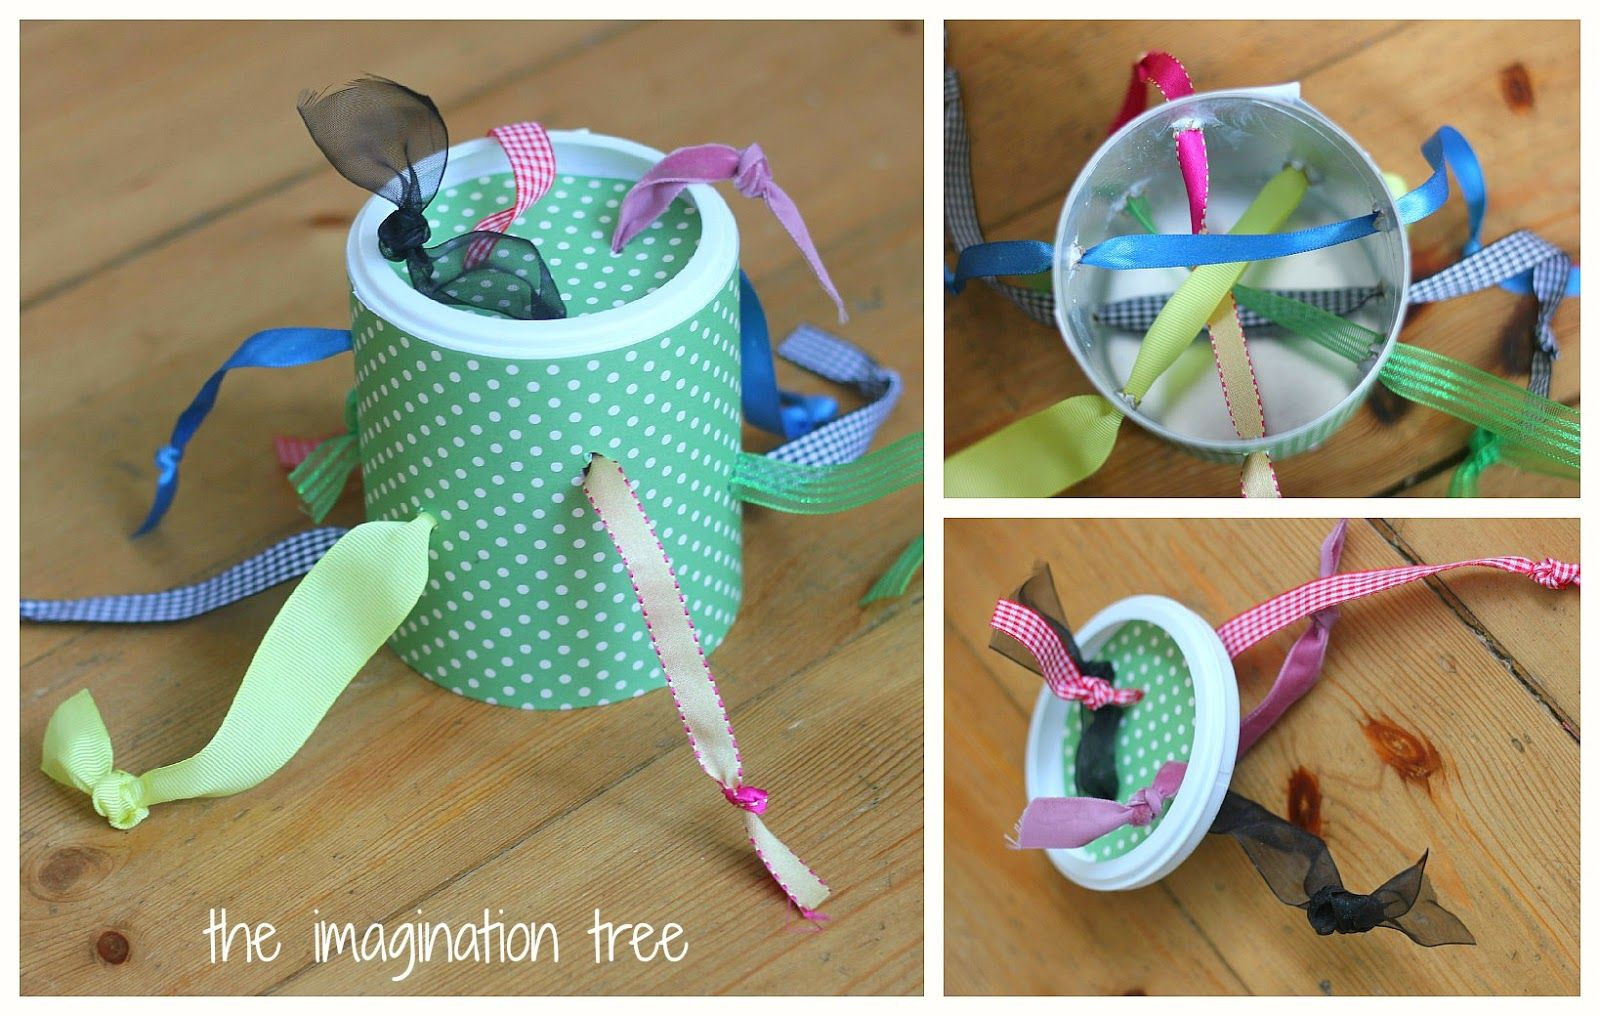 DIY Baby Toys 6 Months
 Best 25 DIY toys for 6 month old ideas on Pinterest